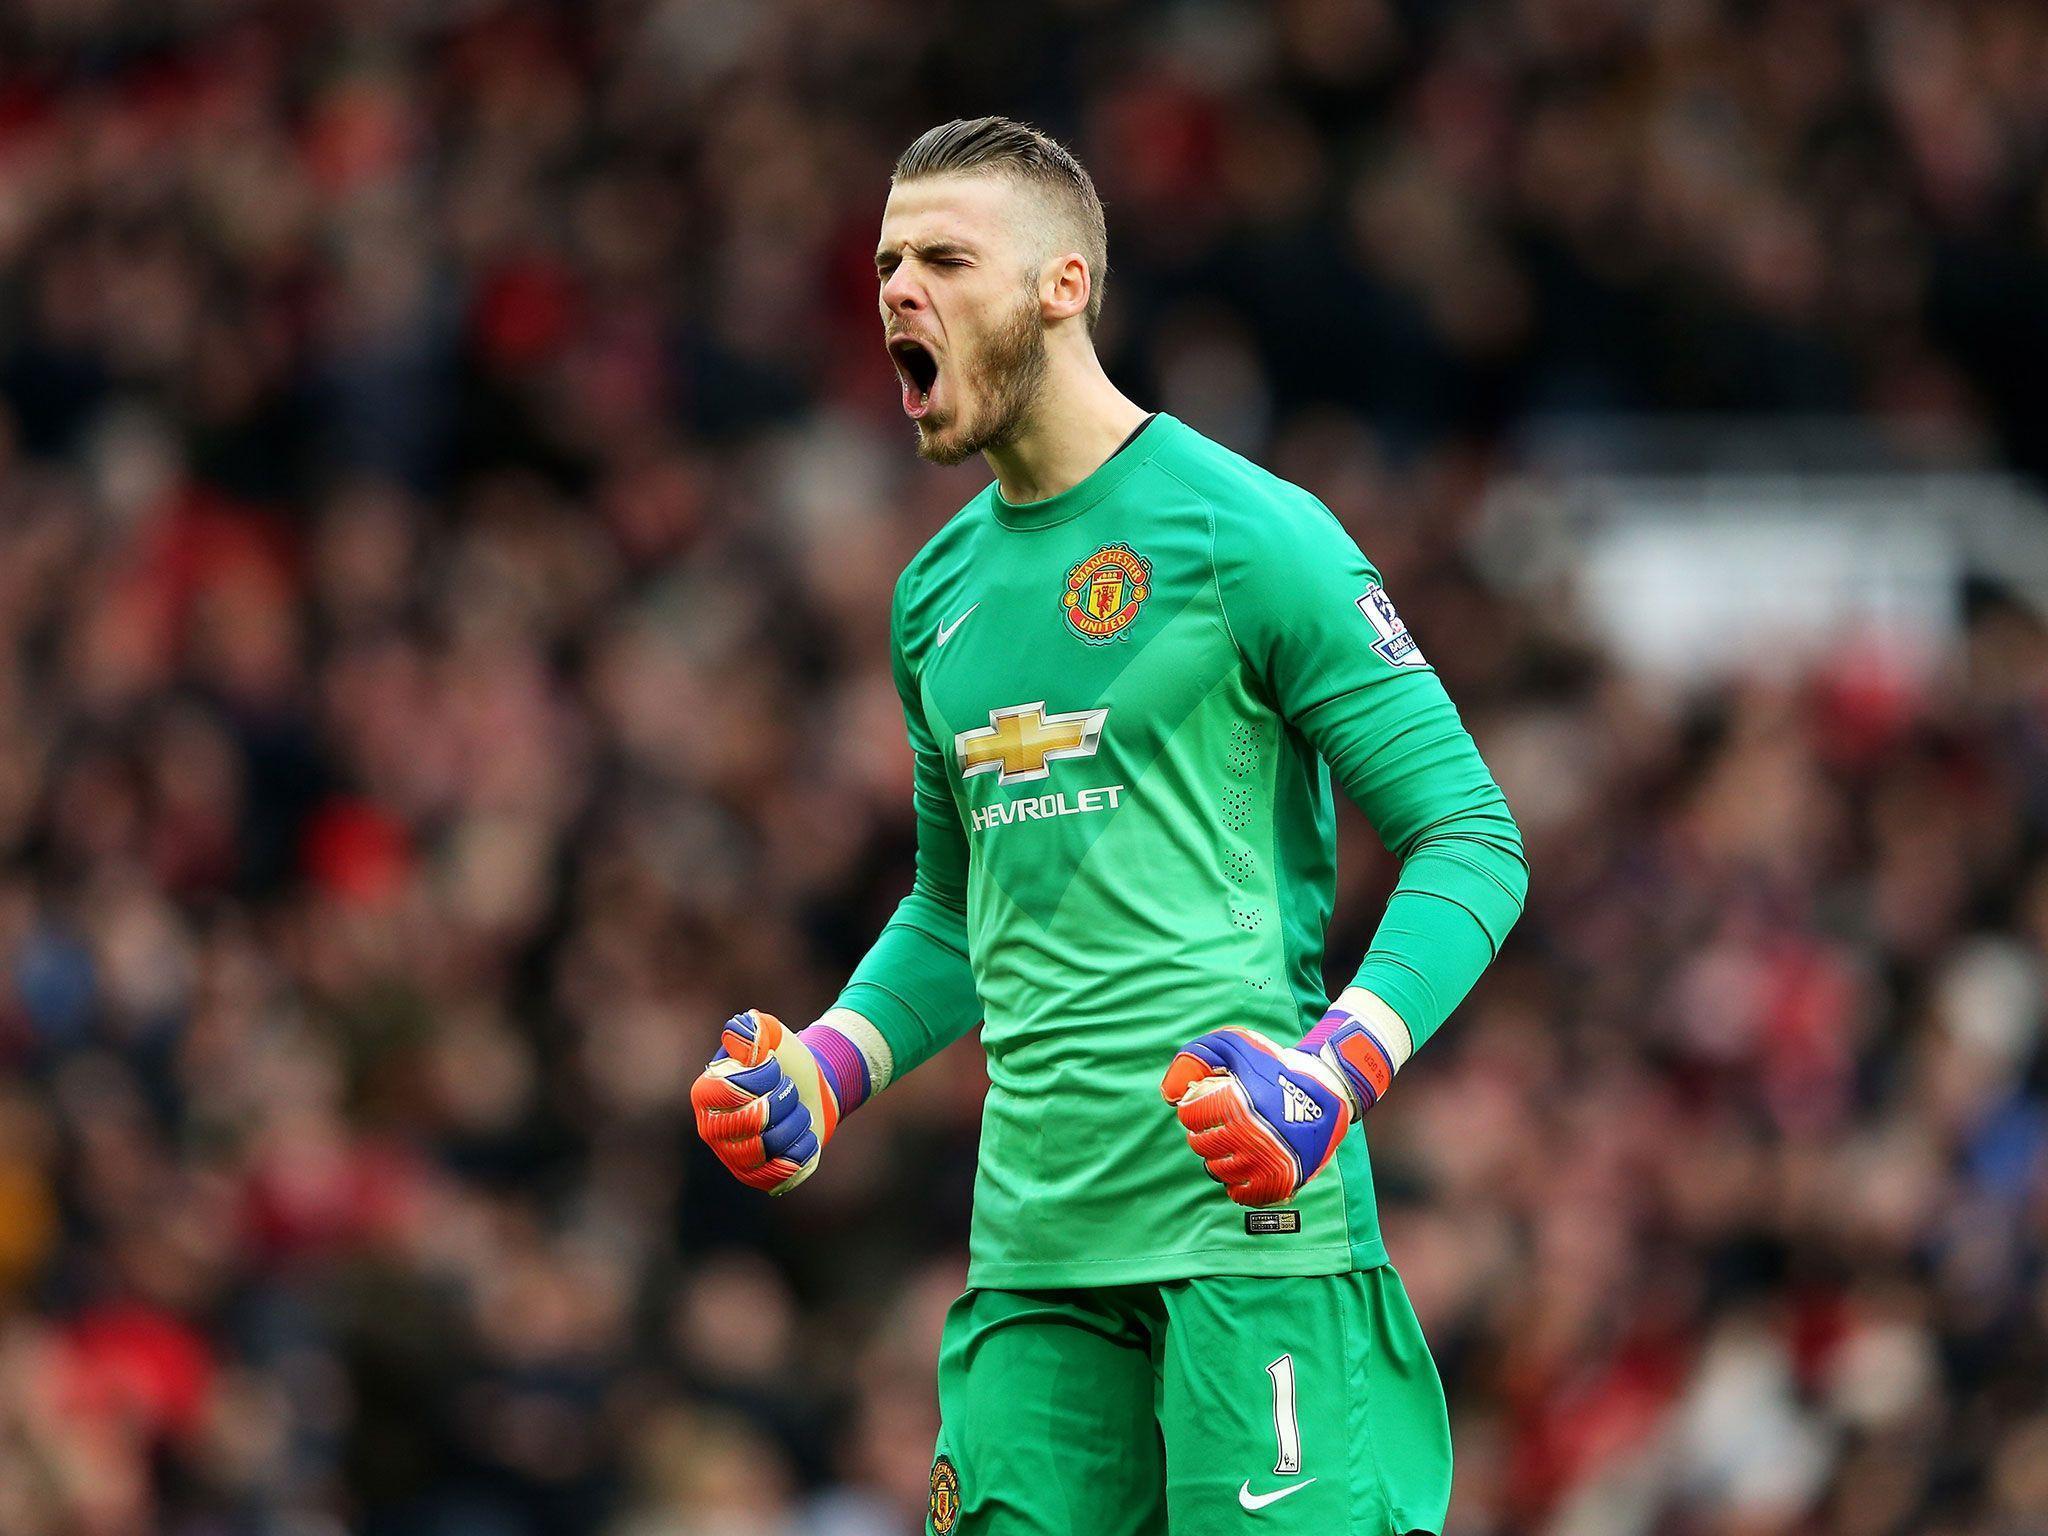 David De Gea to Real Madrid: Manchester United goalkeeper spotted